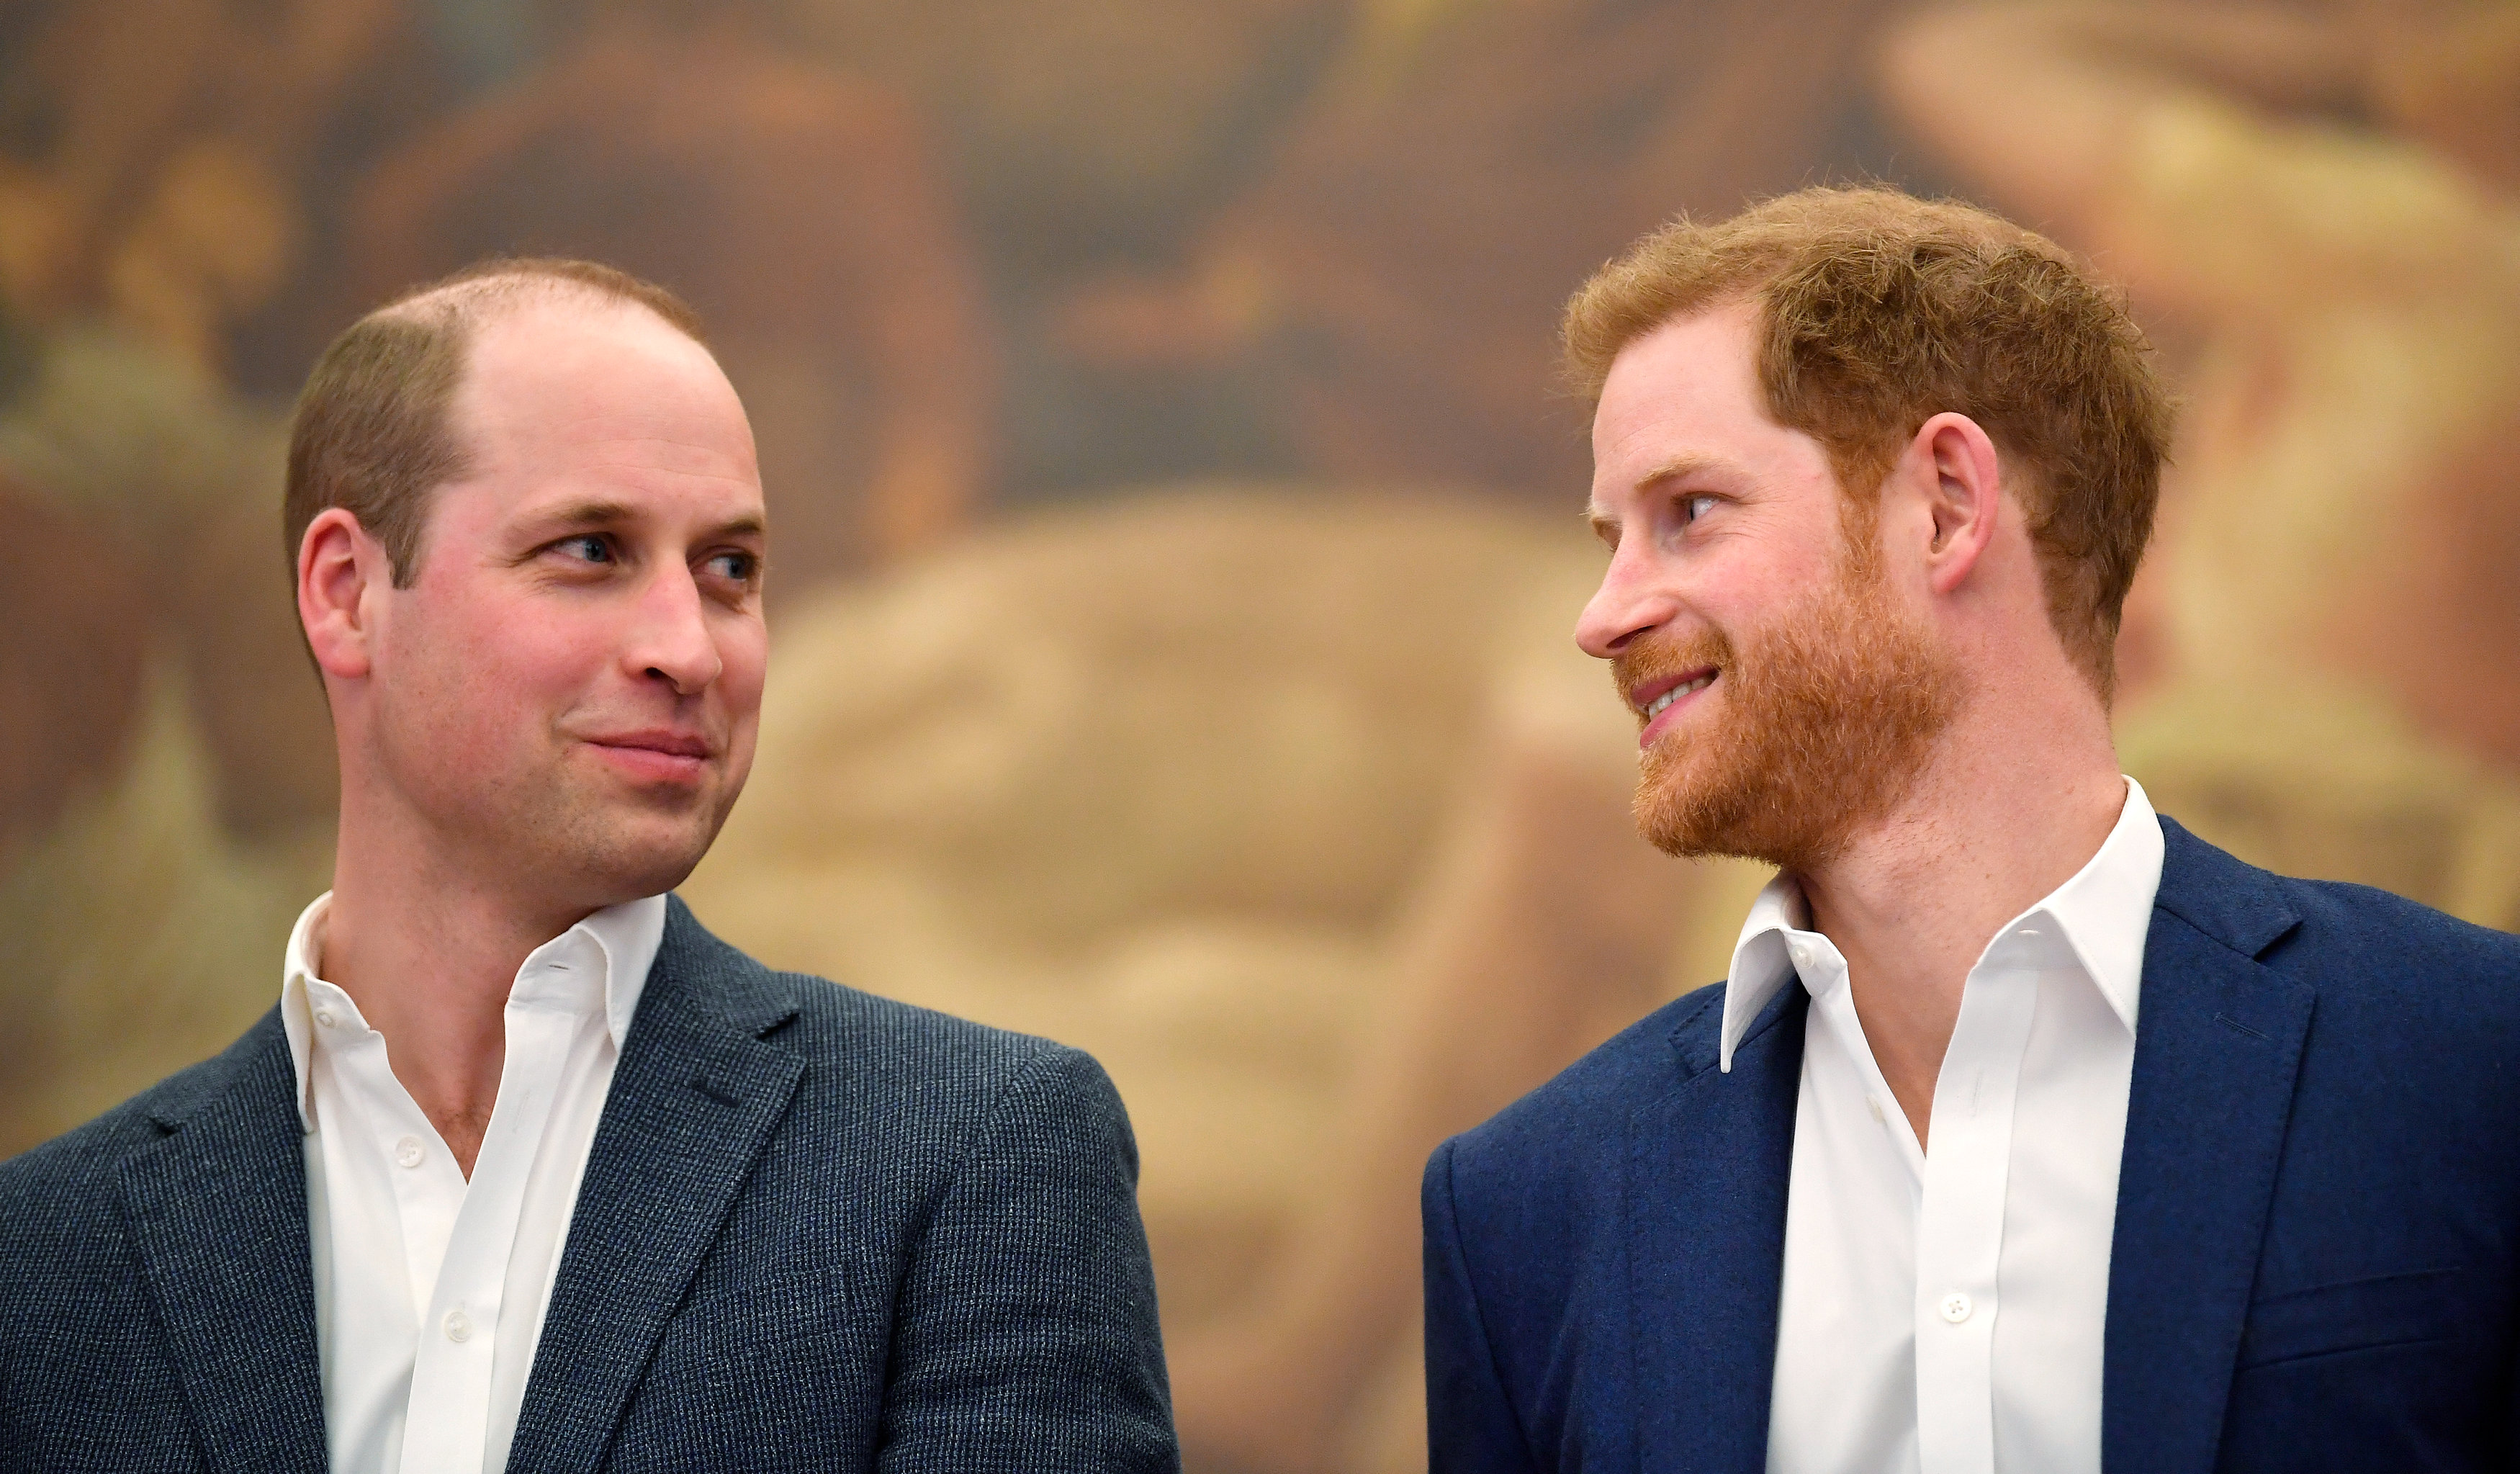 Prince William and Prince Harry attend the opening of the Greenhouse Sports Centre on April 26, 2018 in London, United Kingdom. | Source: Getty Images